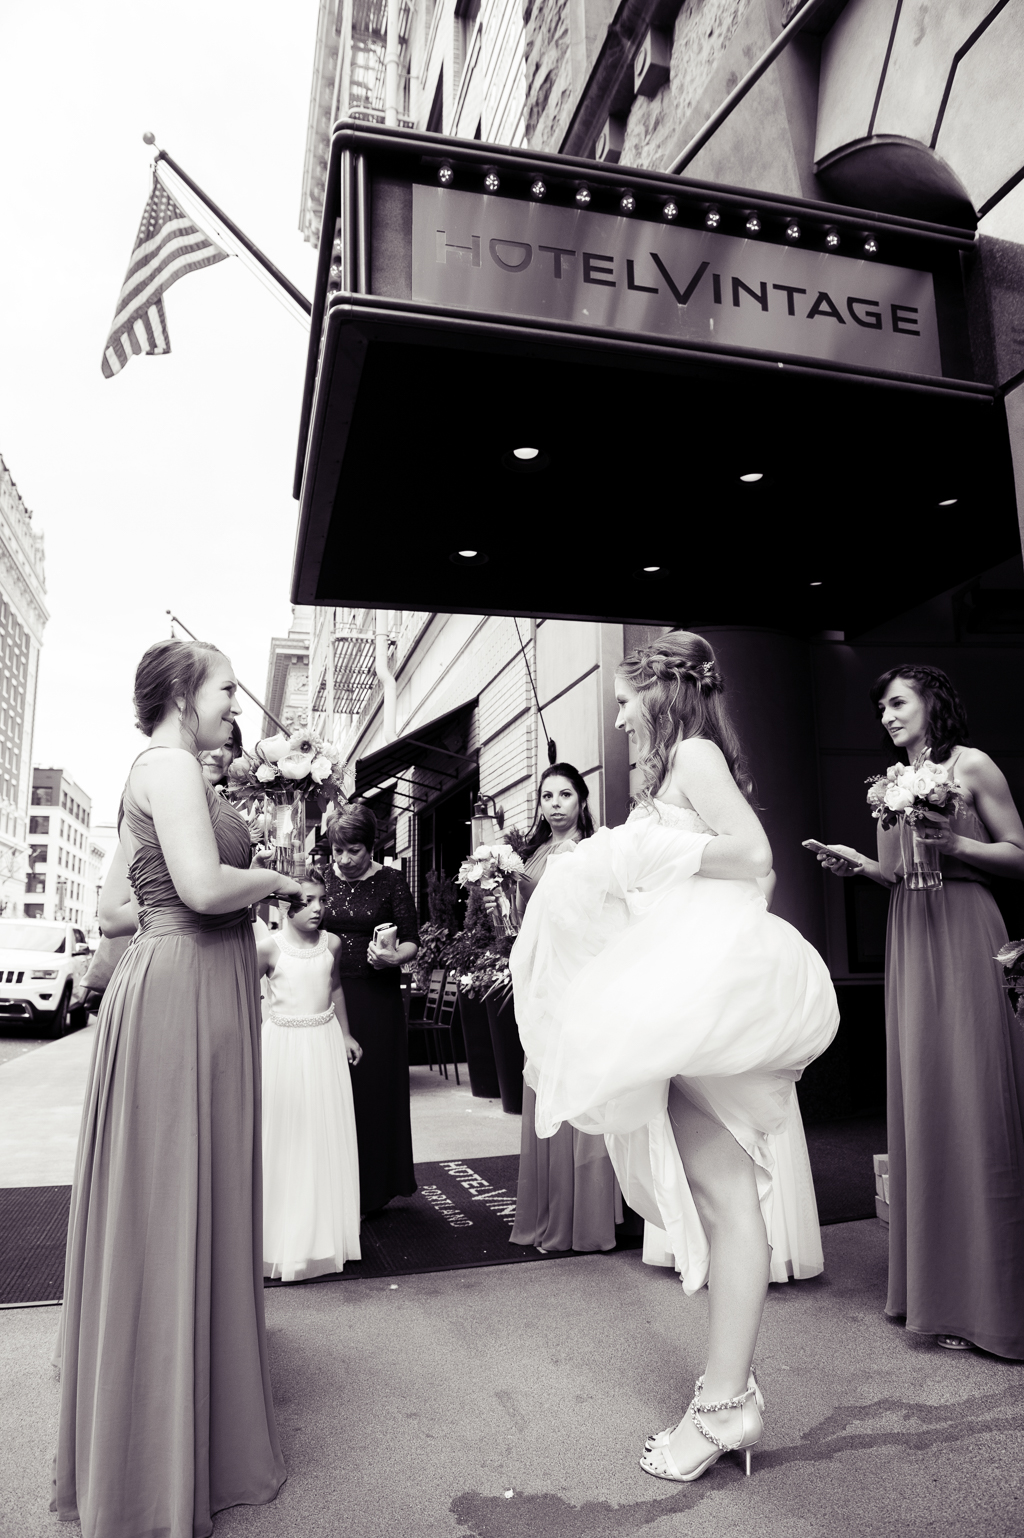 bride stands outside front entrance of hotel vintage holding her wedding dress up while her bridesmaids wait for taxi